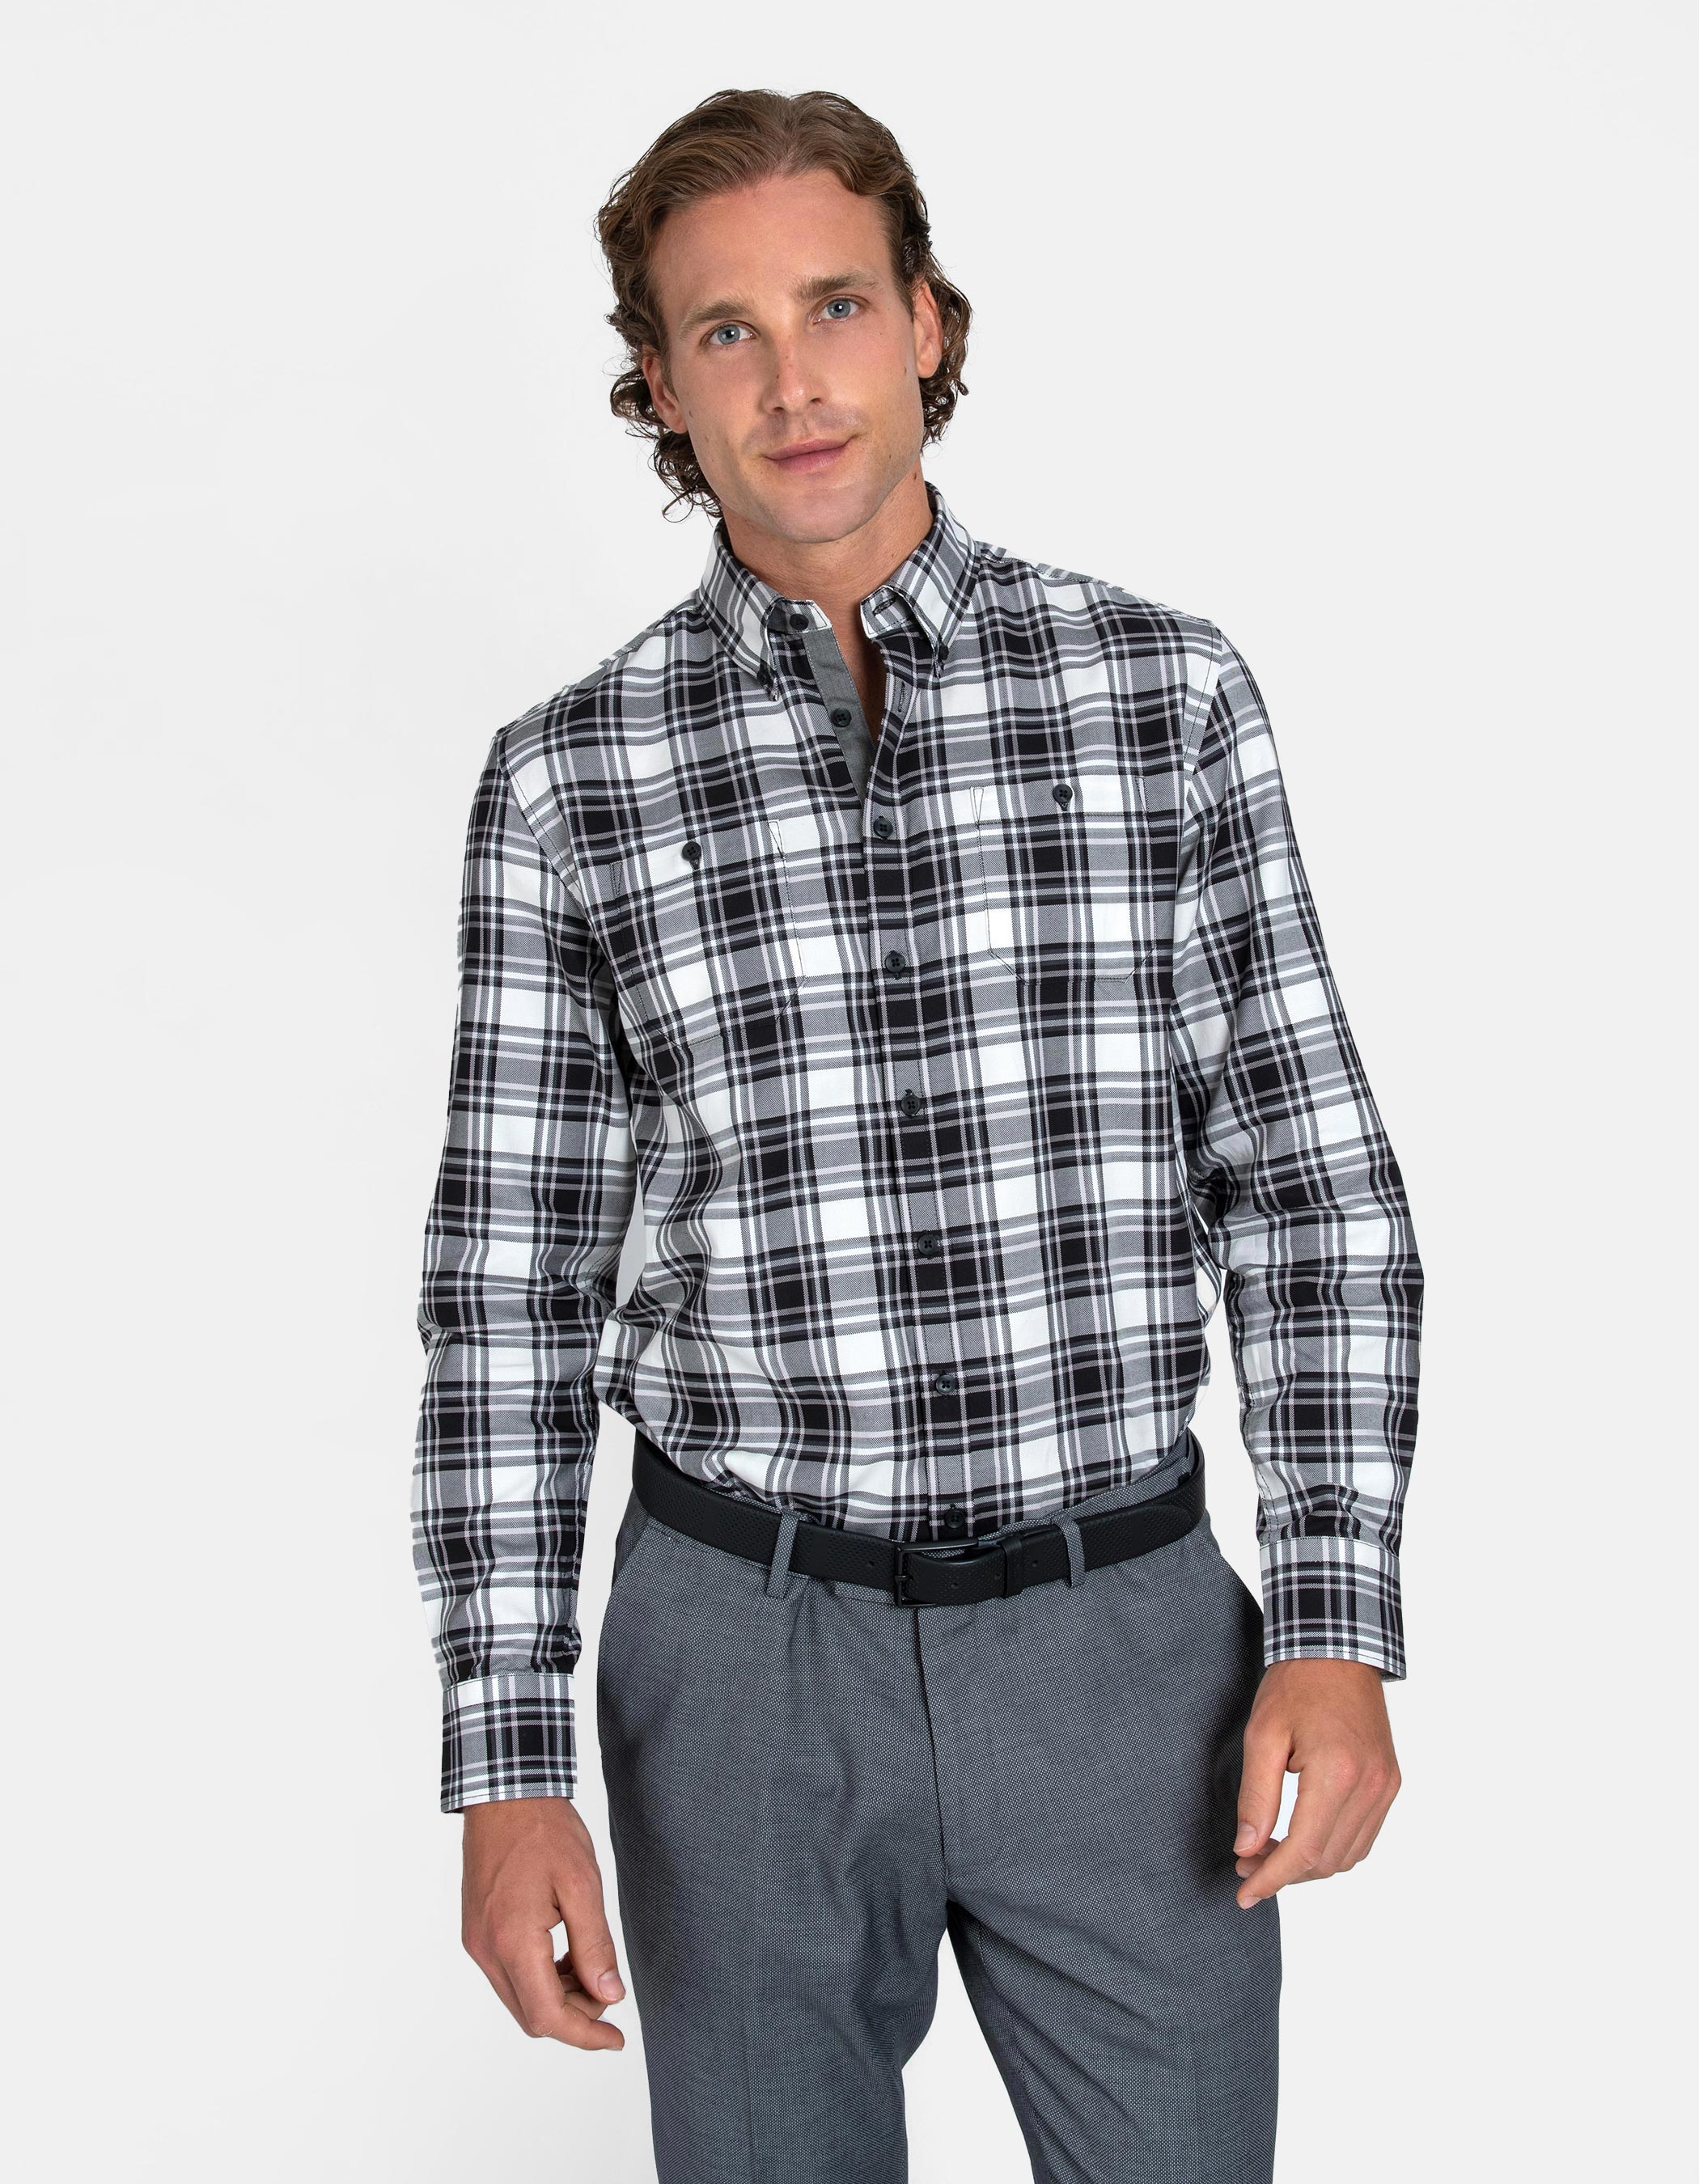 Checked shirt elbow patches